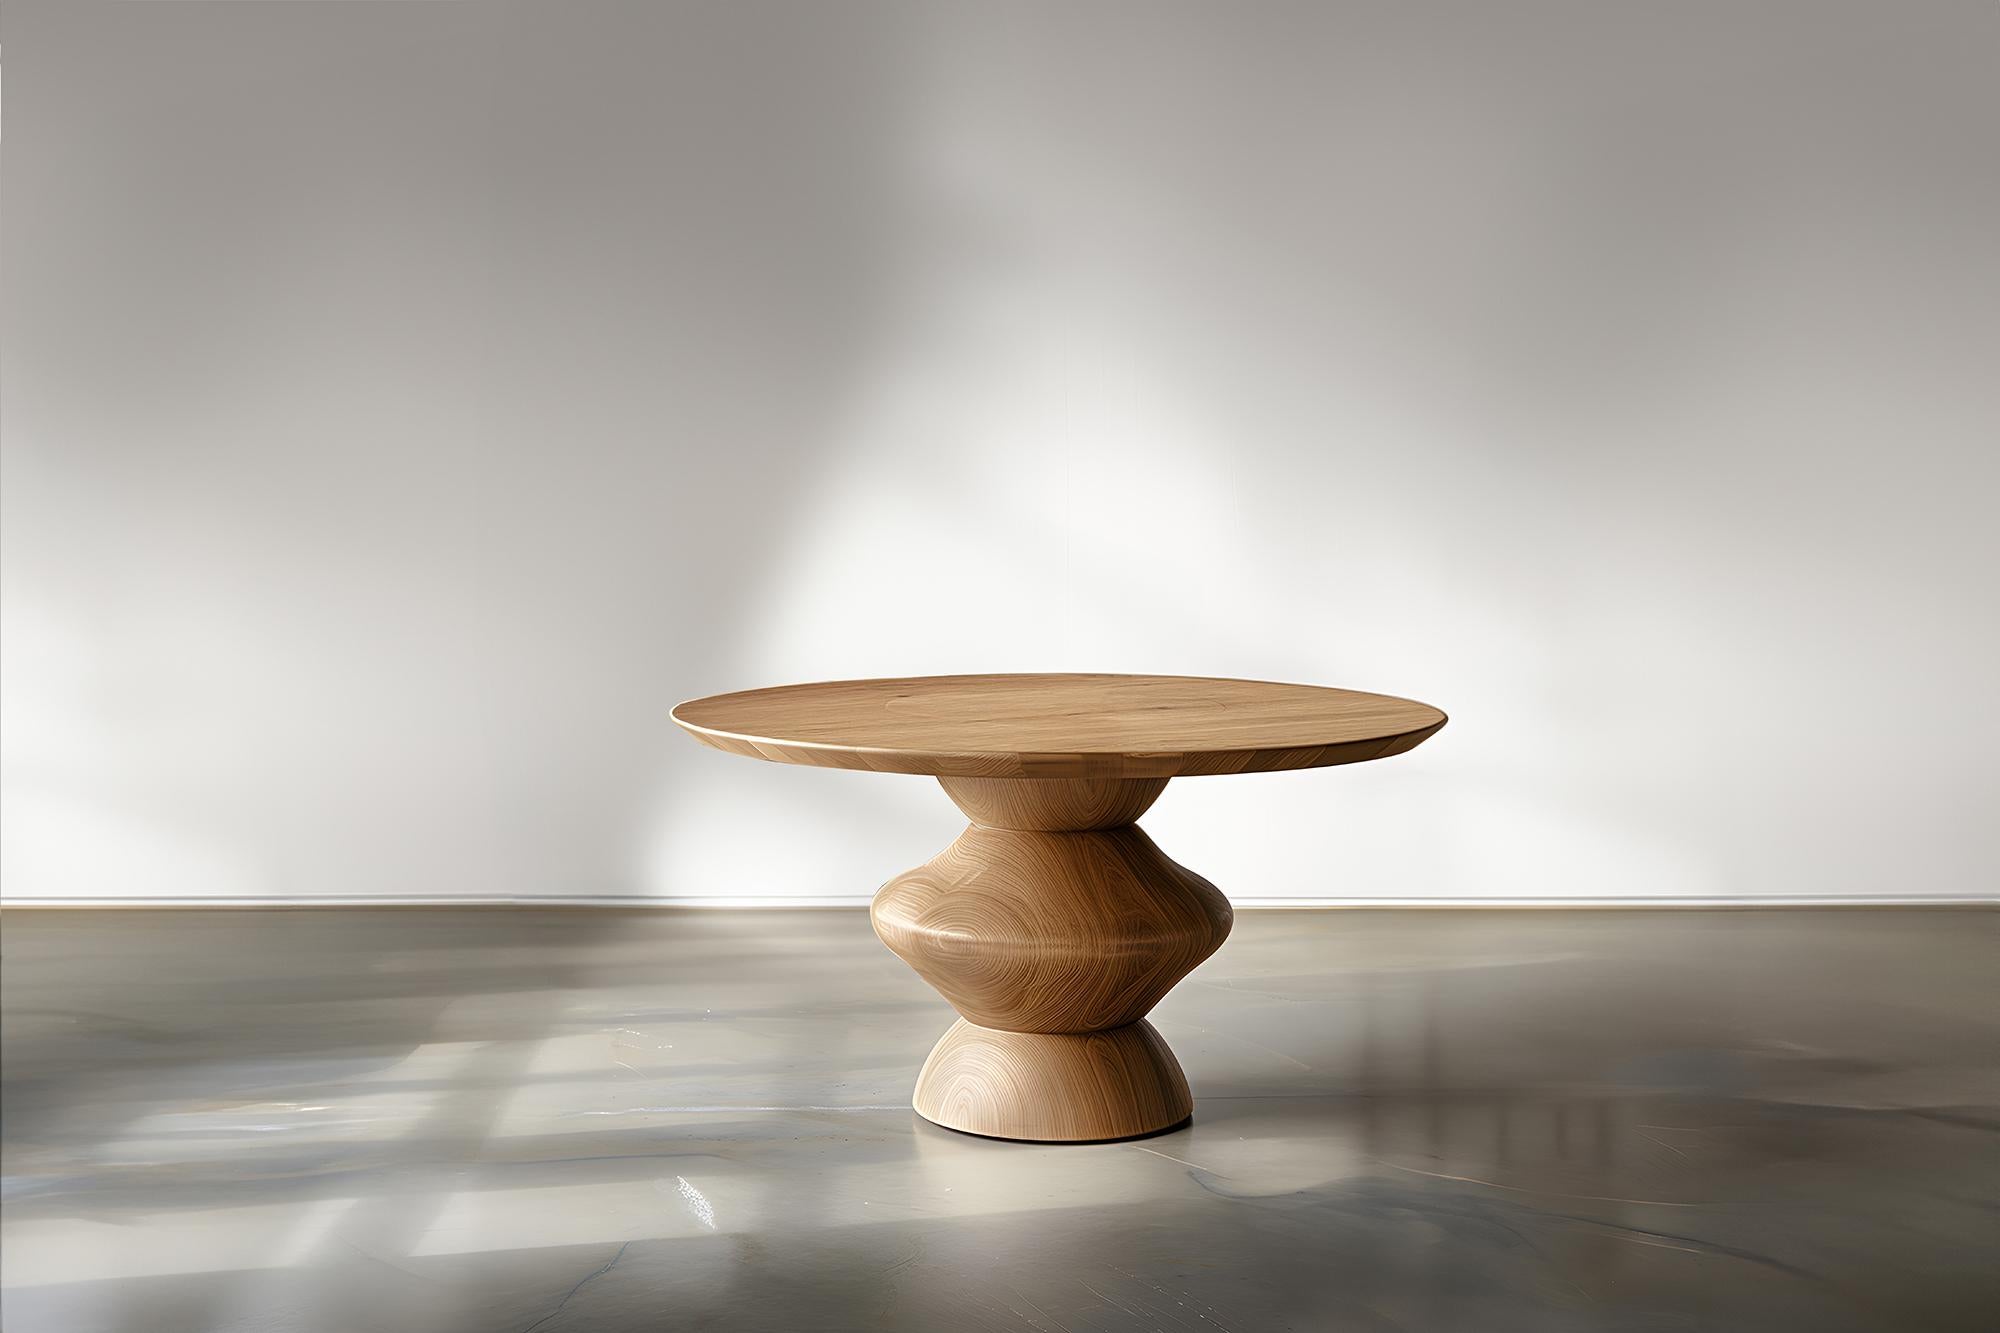 Socle Series No15, Console Tables by NONO, Wood Elegance
——

Introducing the 